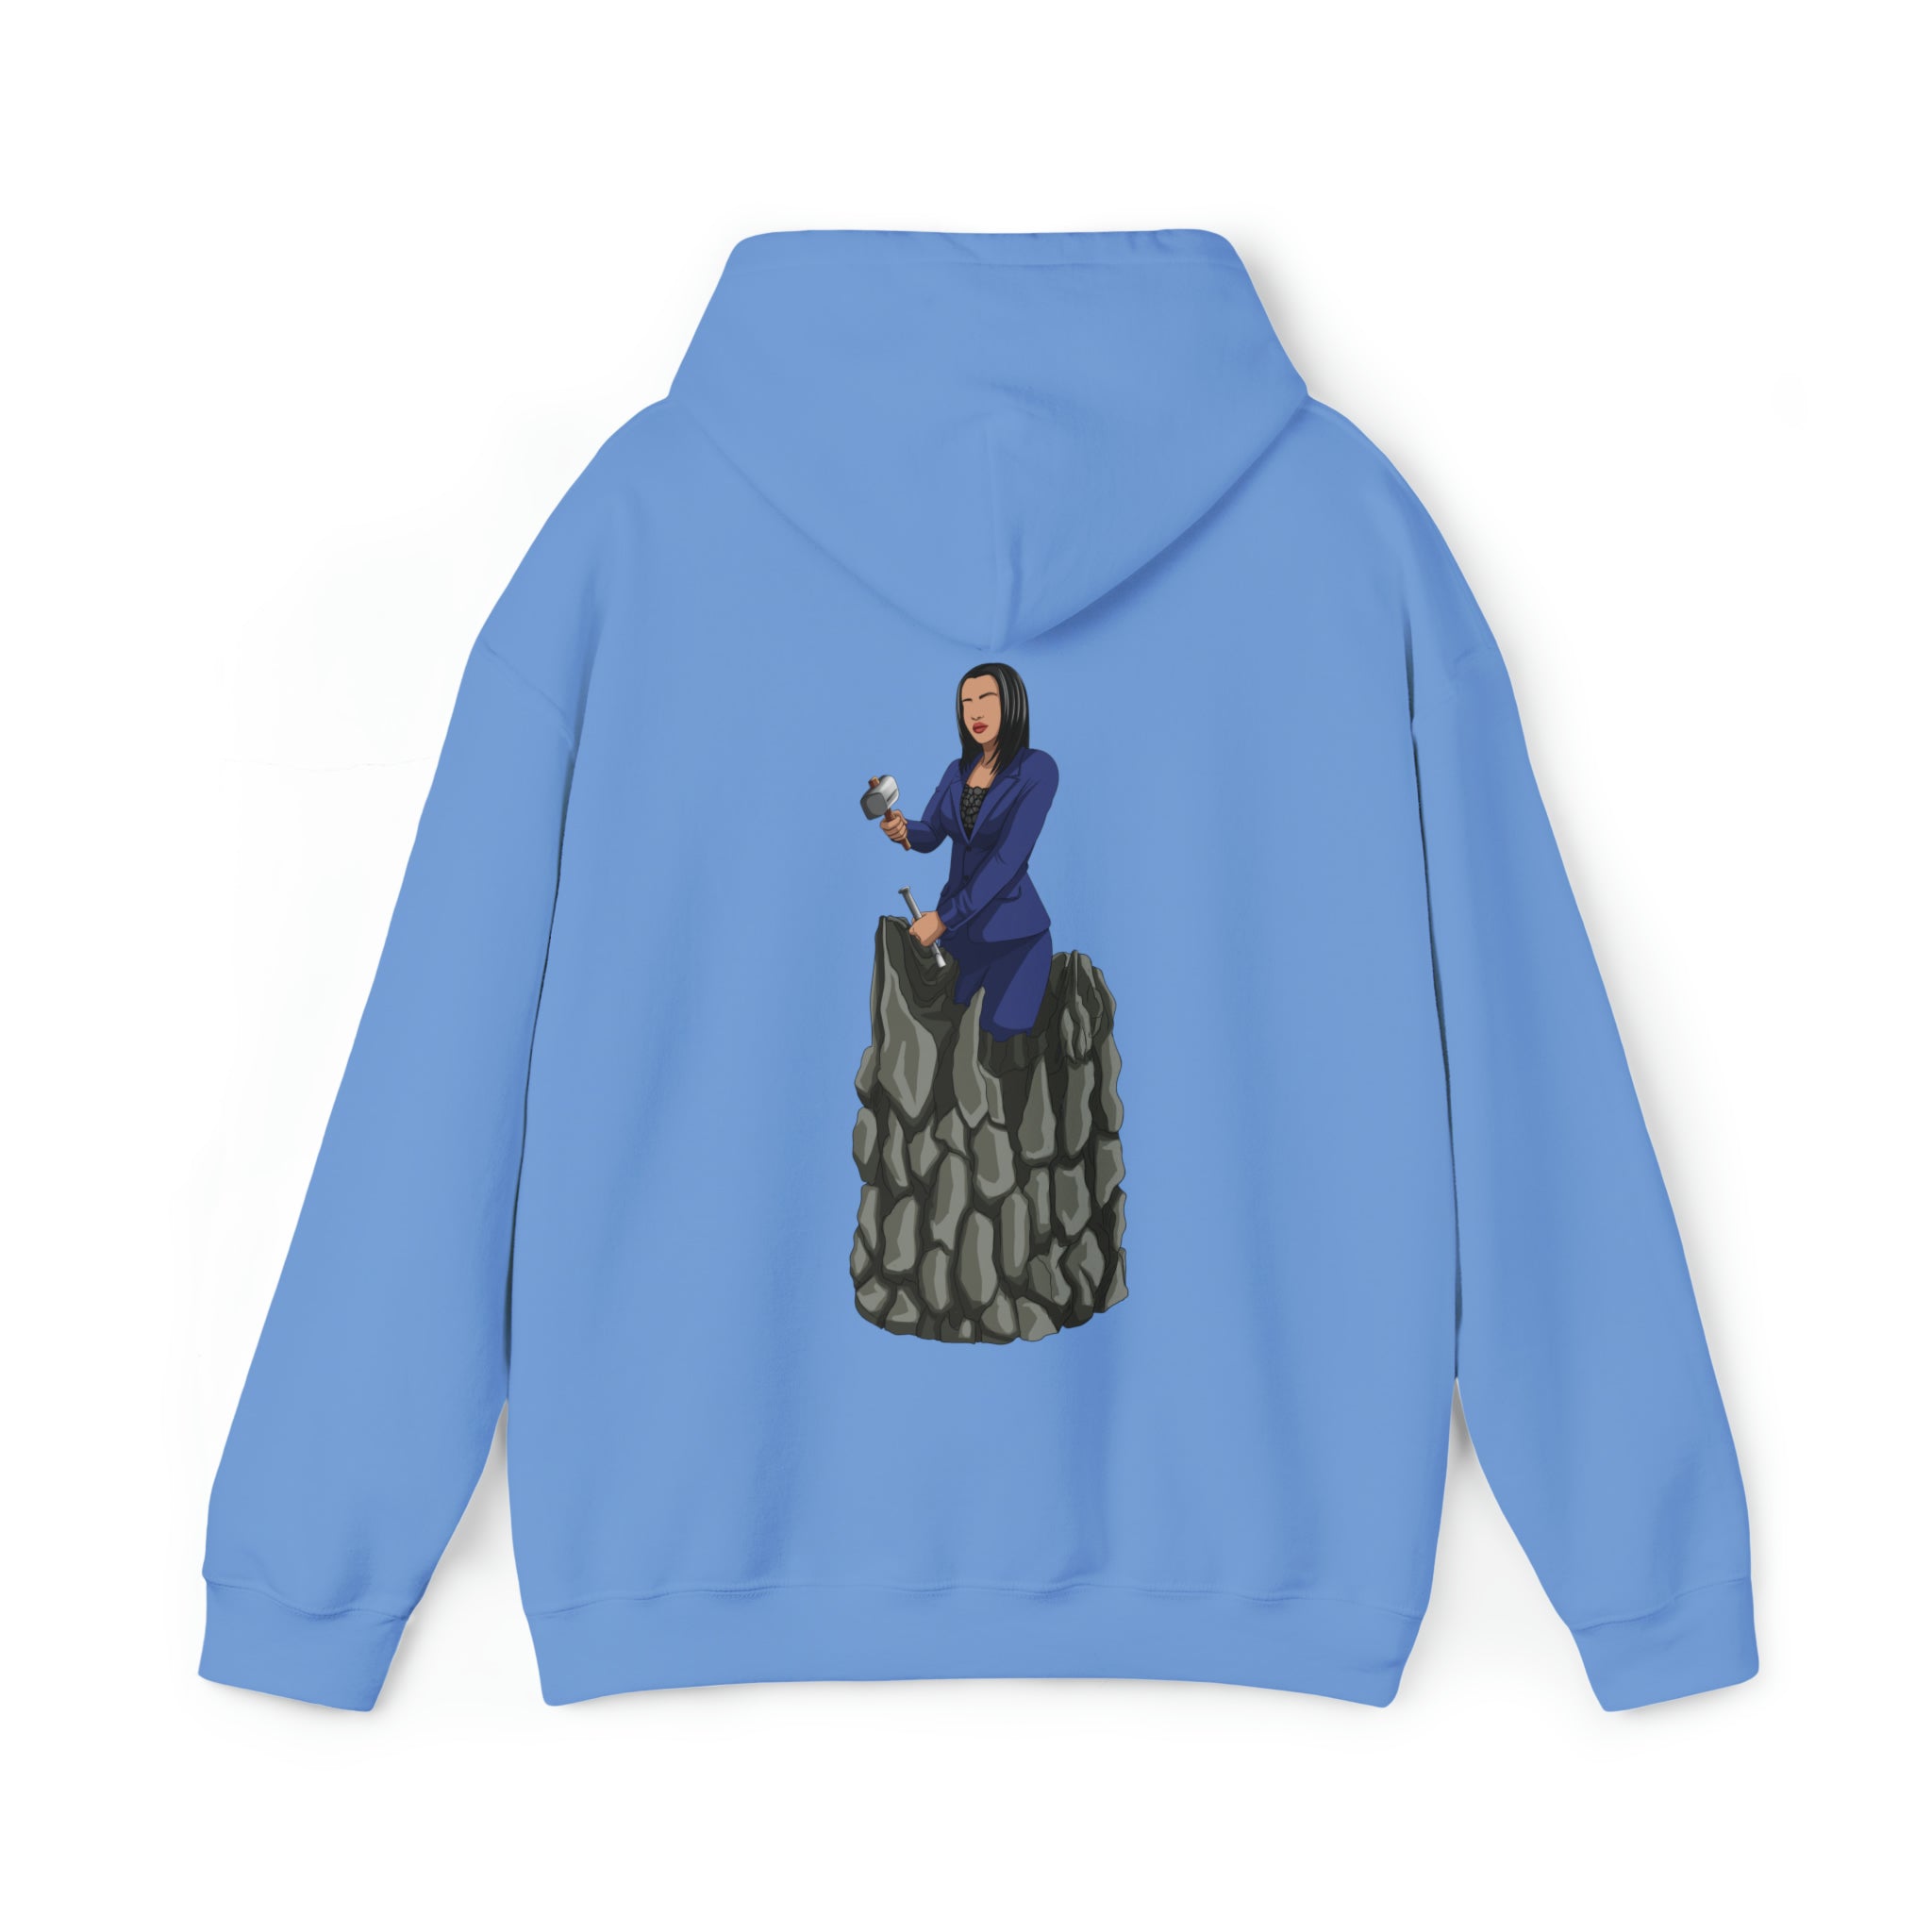 A person working hard to better his/herself - Heavy Blend™ Self-Made Hoodie - Woman #2